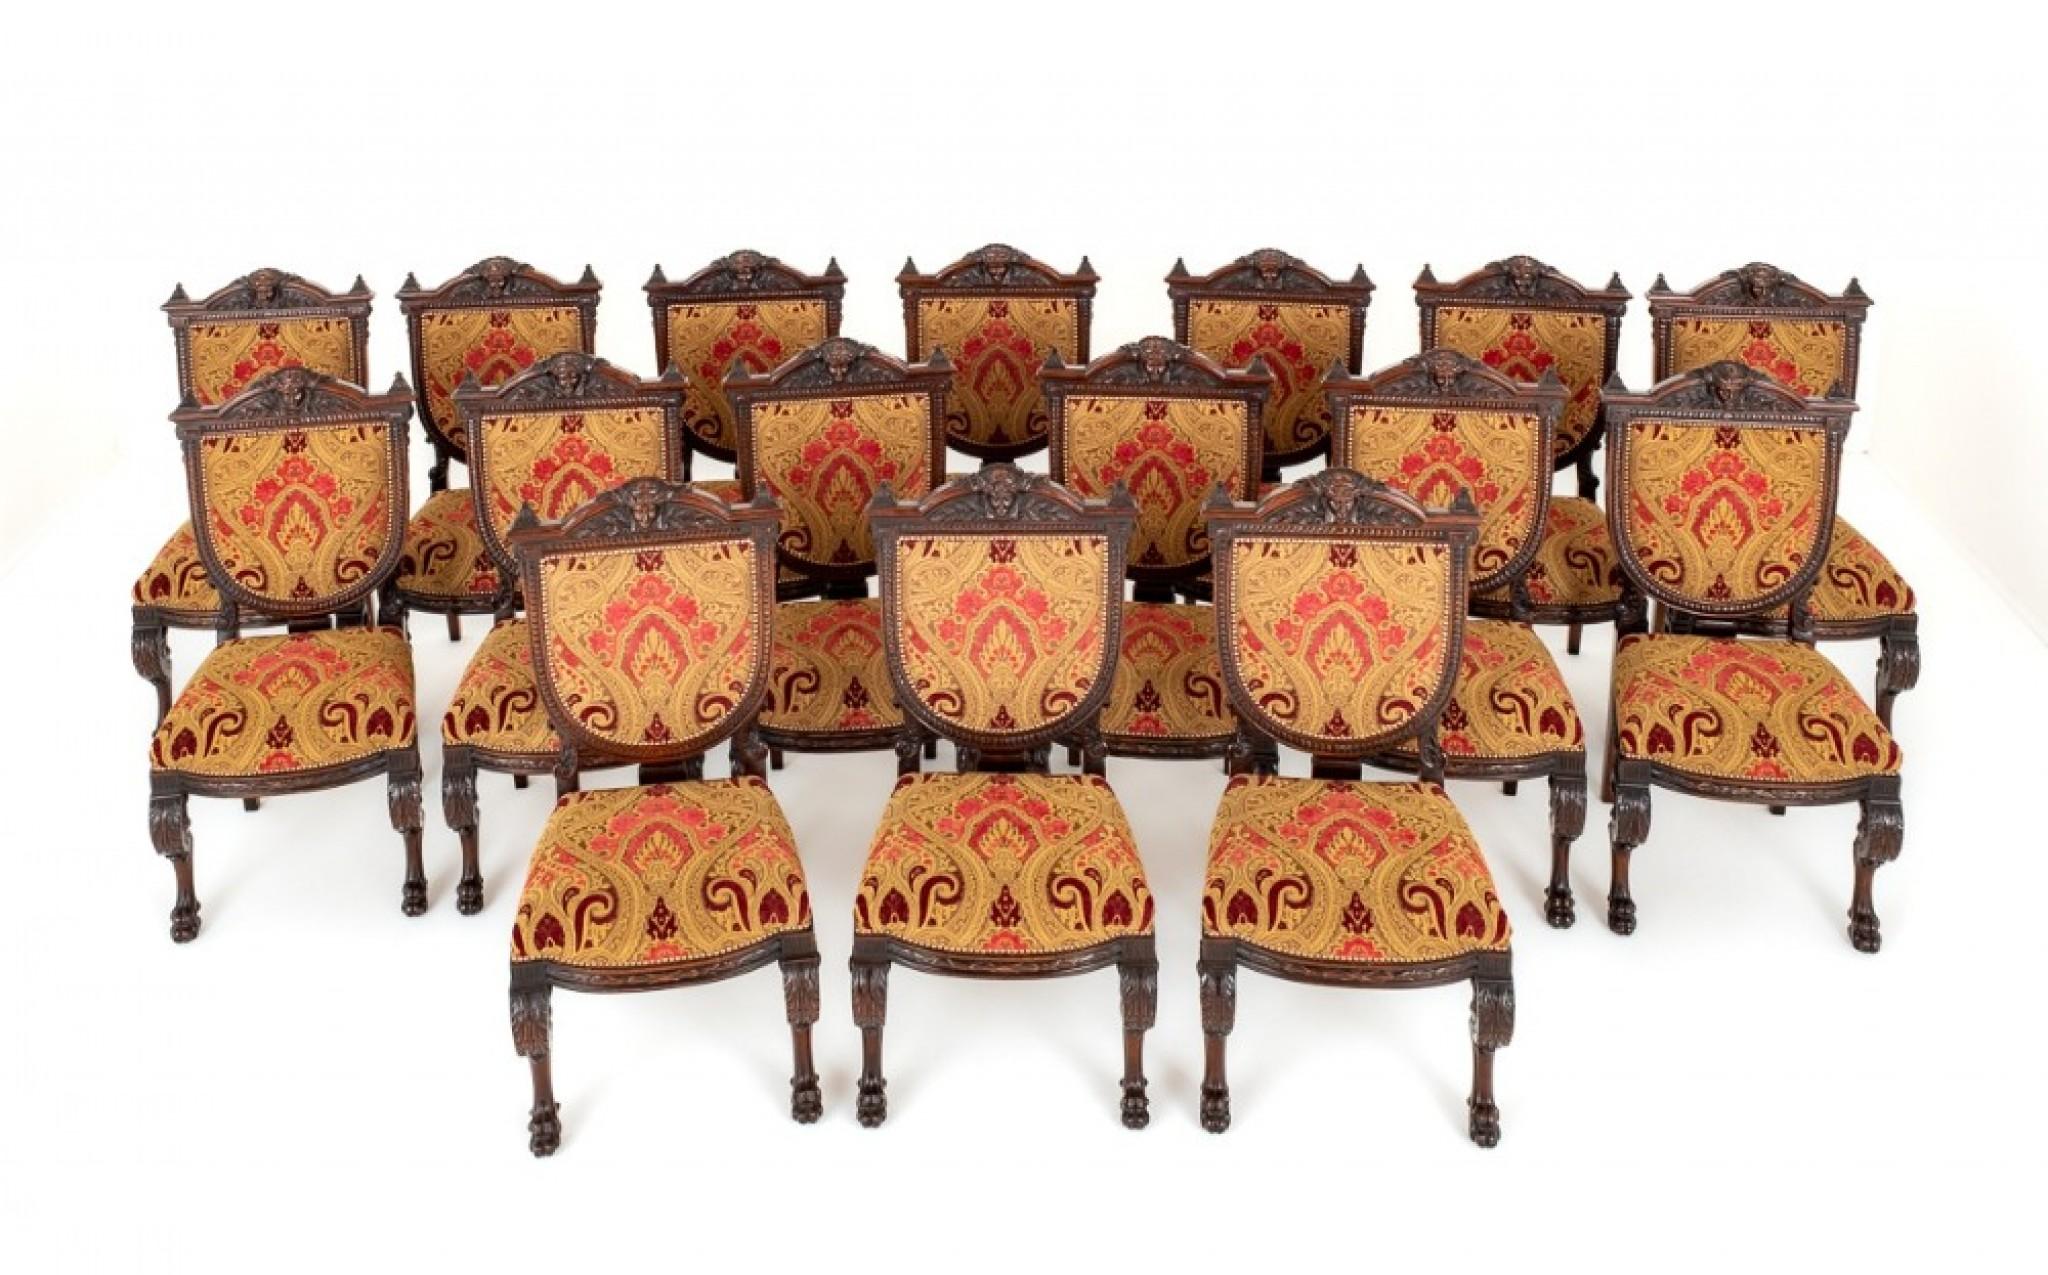 Amazing Set of 16 Mahogany Renaissance Style Dining Chairs.
circa 1920
The Chairs stand Upon Carved and Shaped Front Legs With Lions Paw Feet and Sabre Back Legs.
The Shaped Frieze Being of a Carved Form.
The Backs of the Chairs Being of a